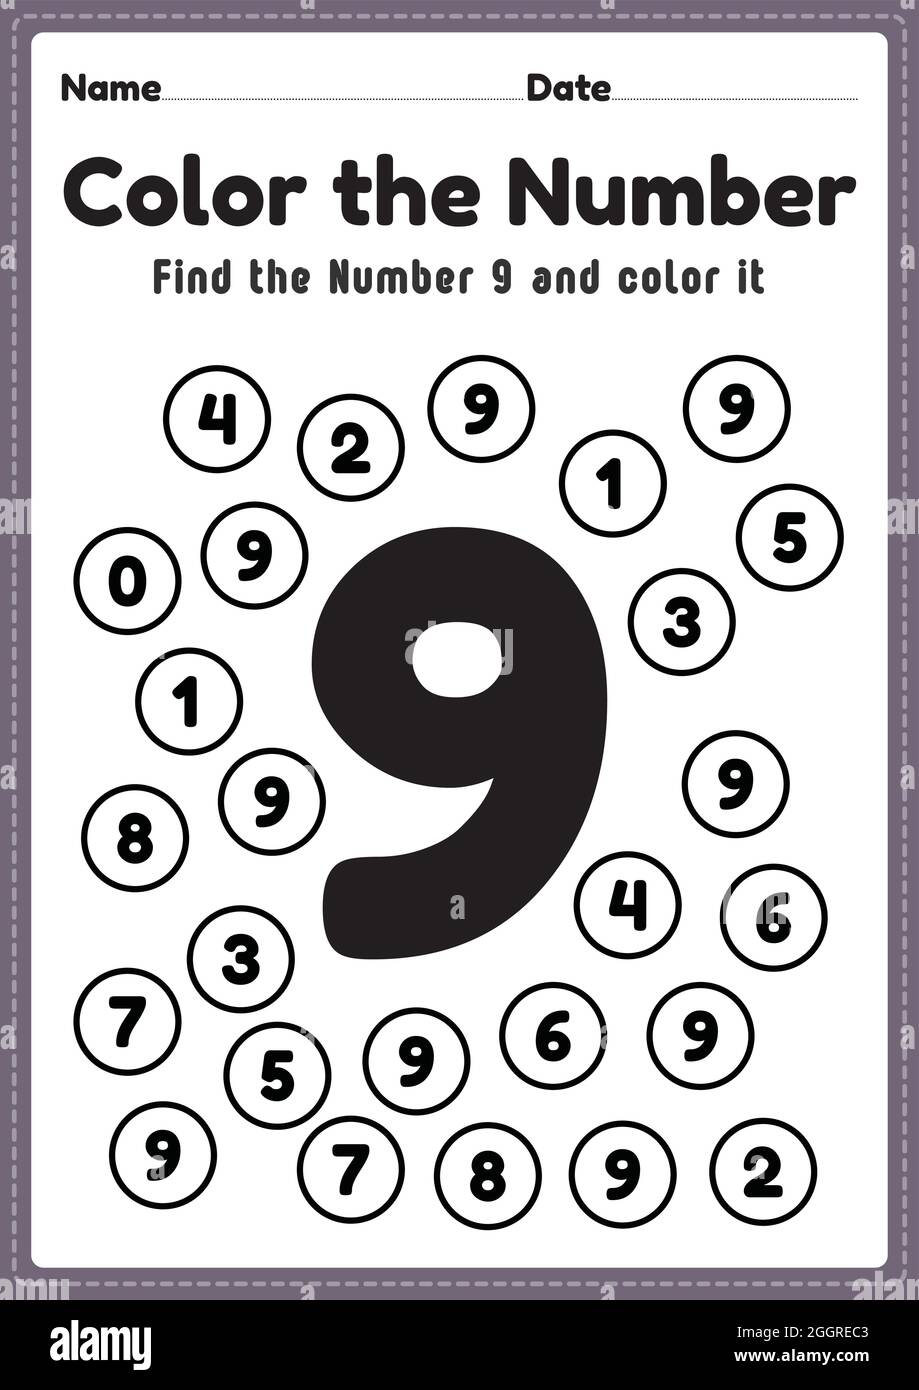 number worksheets for preschool number 9 coloring math activities for kindergarten kids to learn basic mathematics skills in a printable page stock vector image art alamy